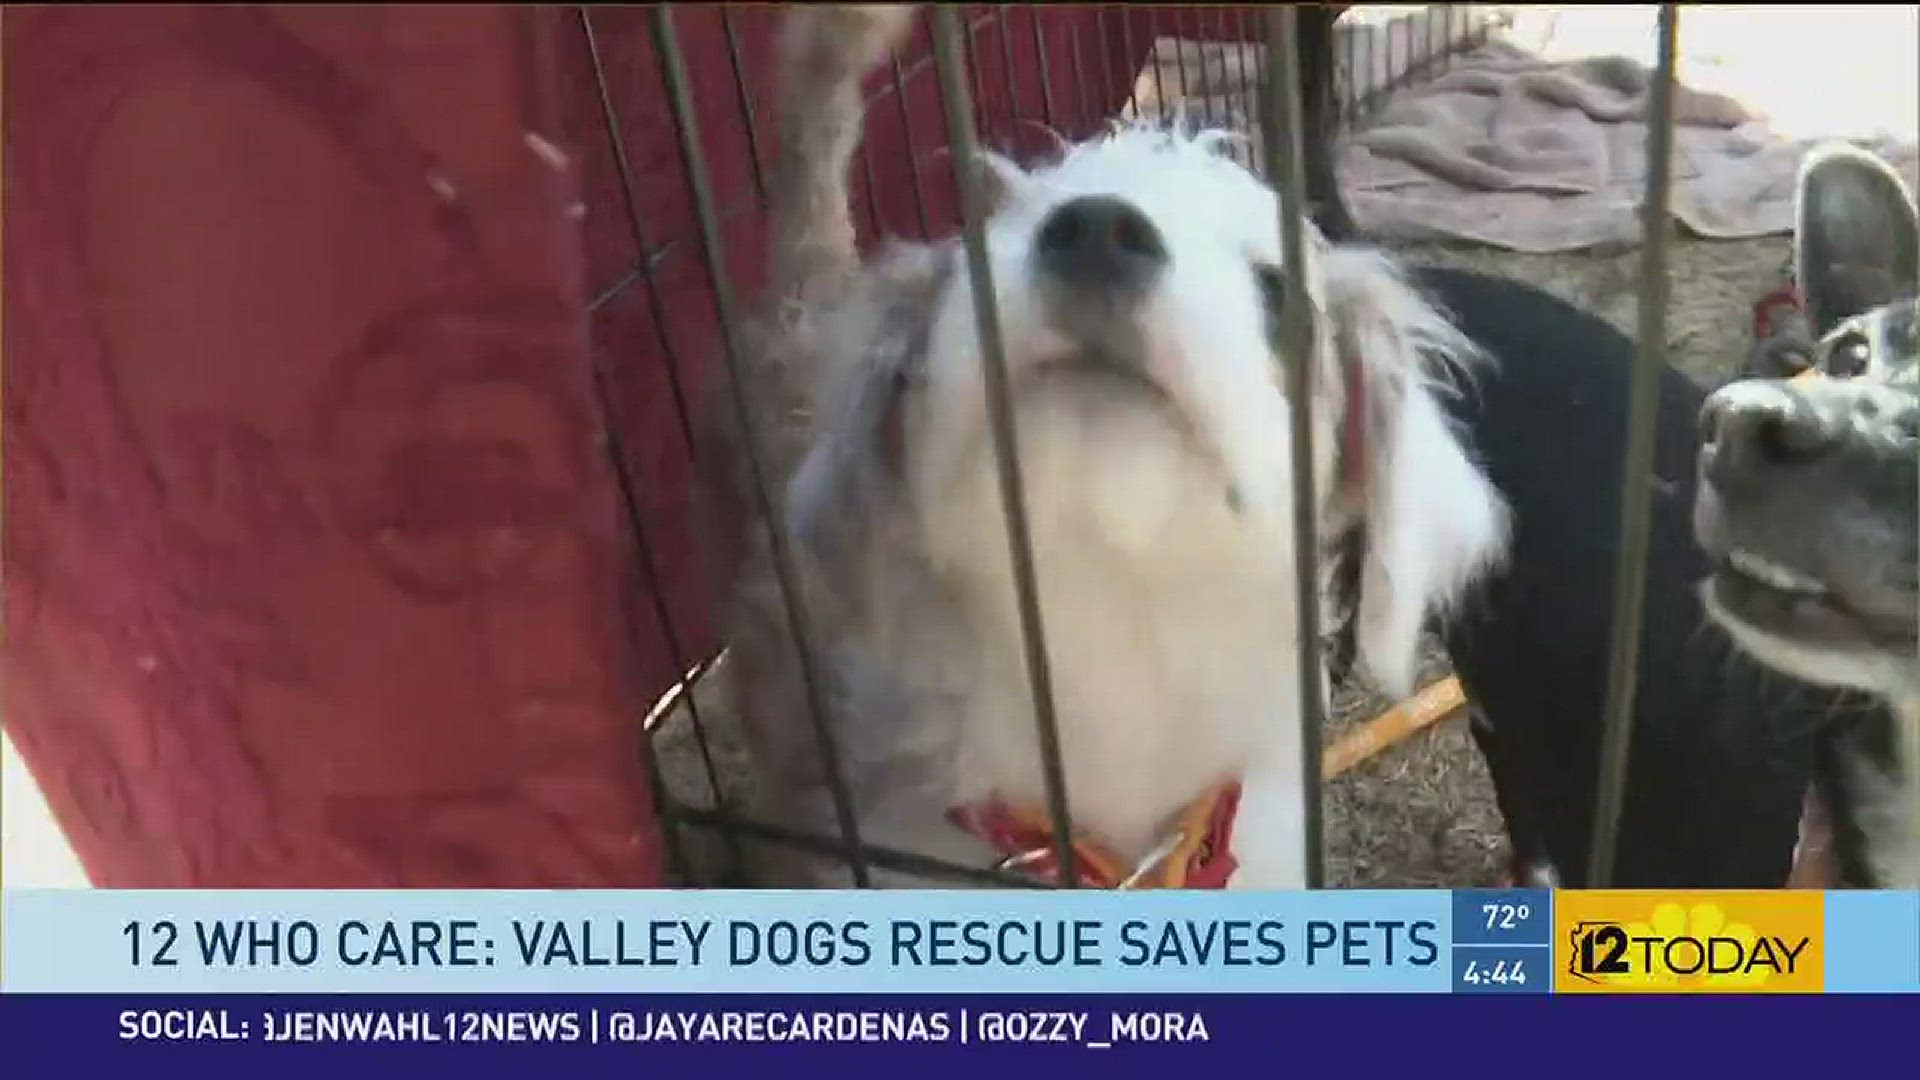 Valley Dogs Rescue it the April 12 Who Care Honoree.